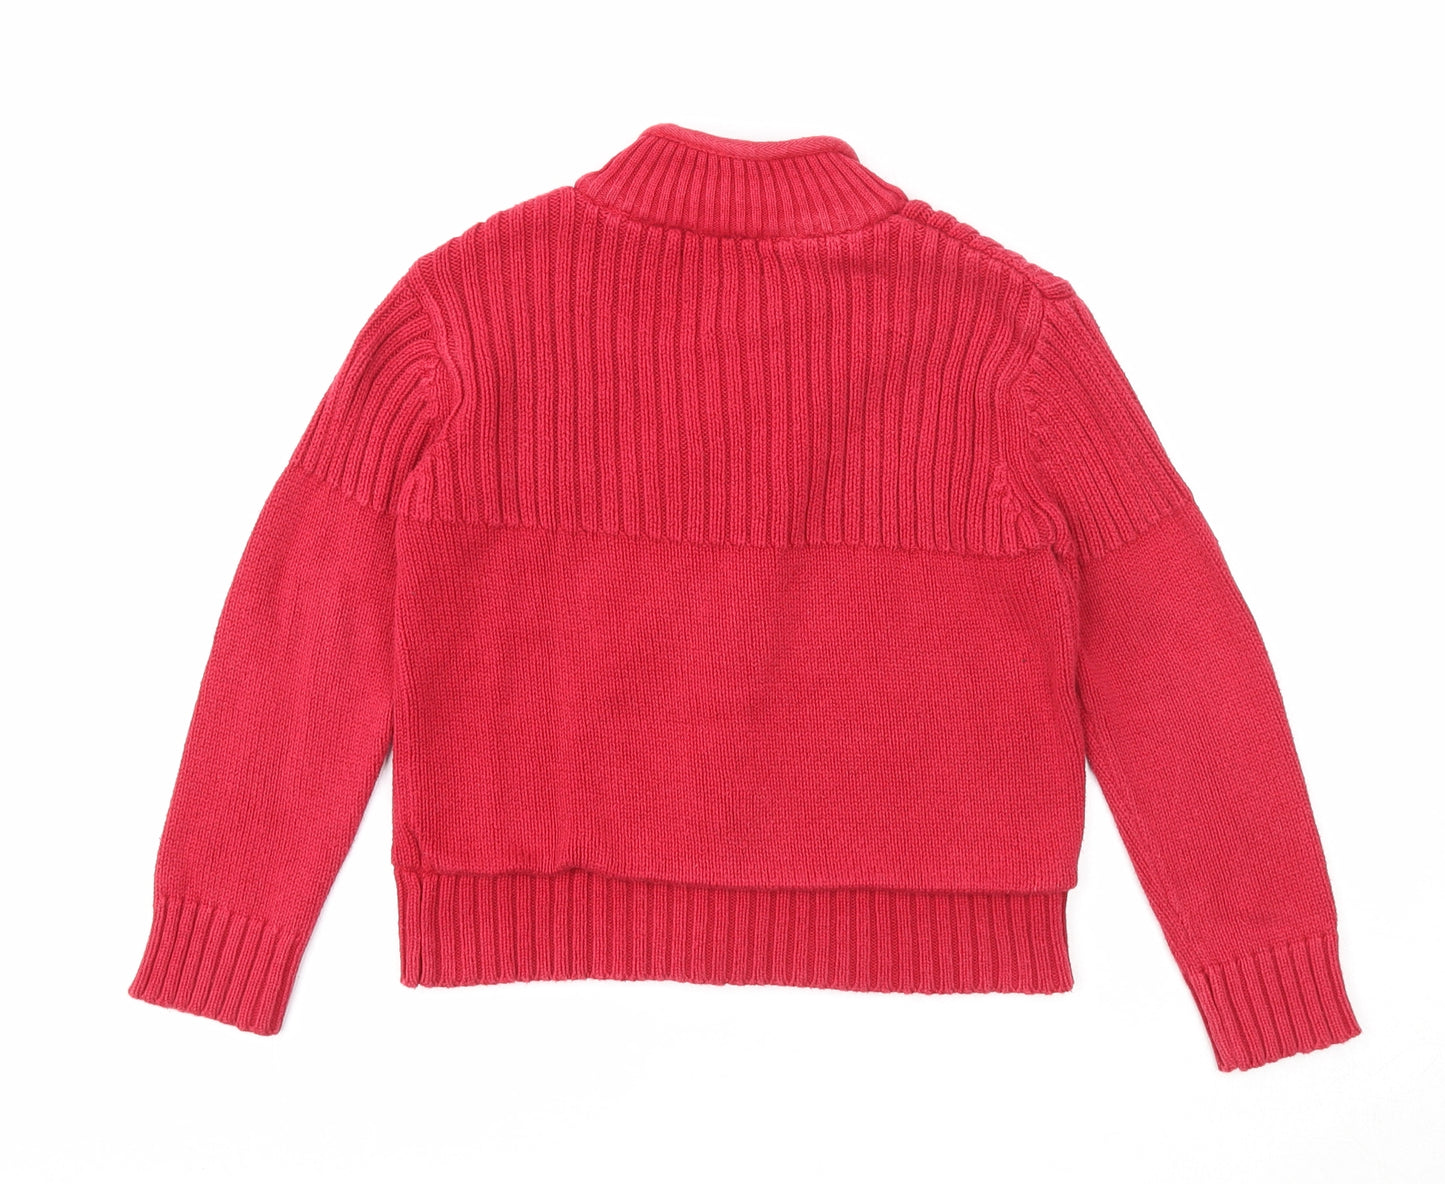 MC Baby Boys Red V-Neck Cotton Full Zip Jumper Size 6 Years Zip